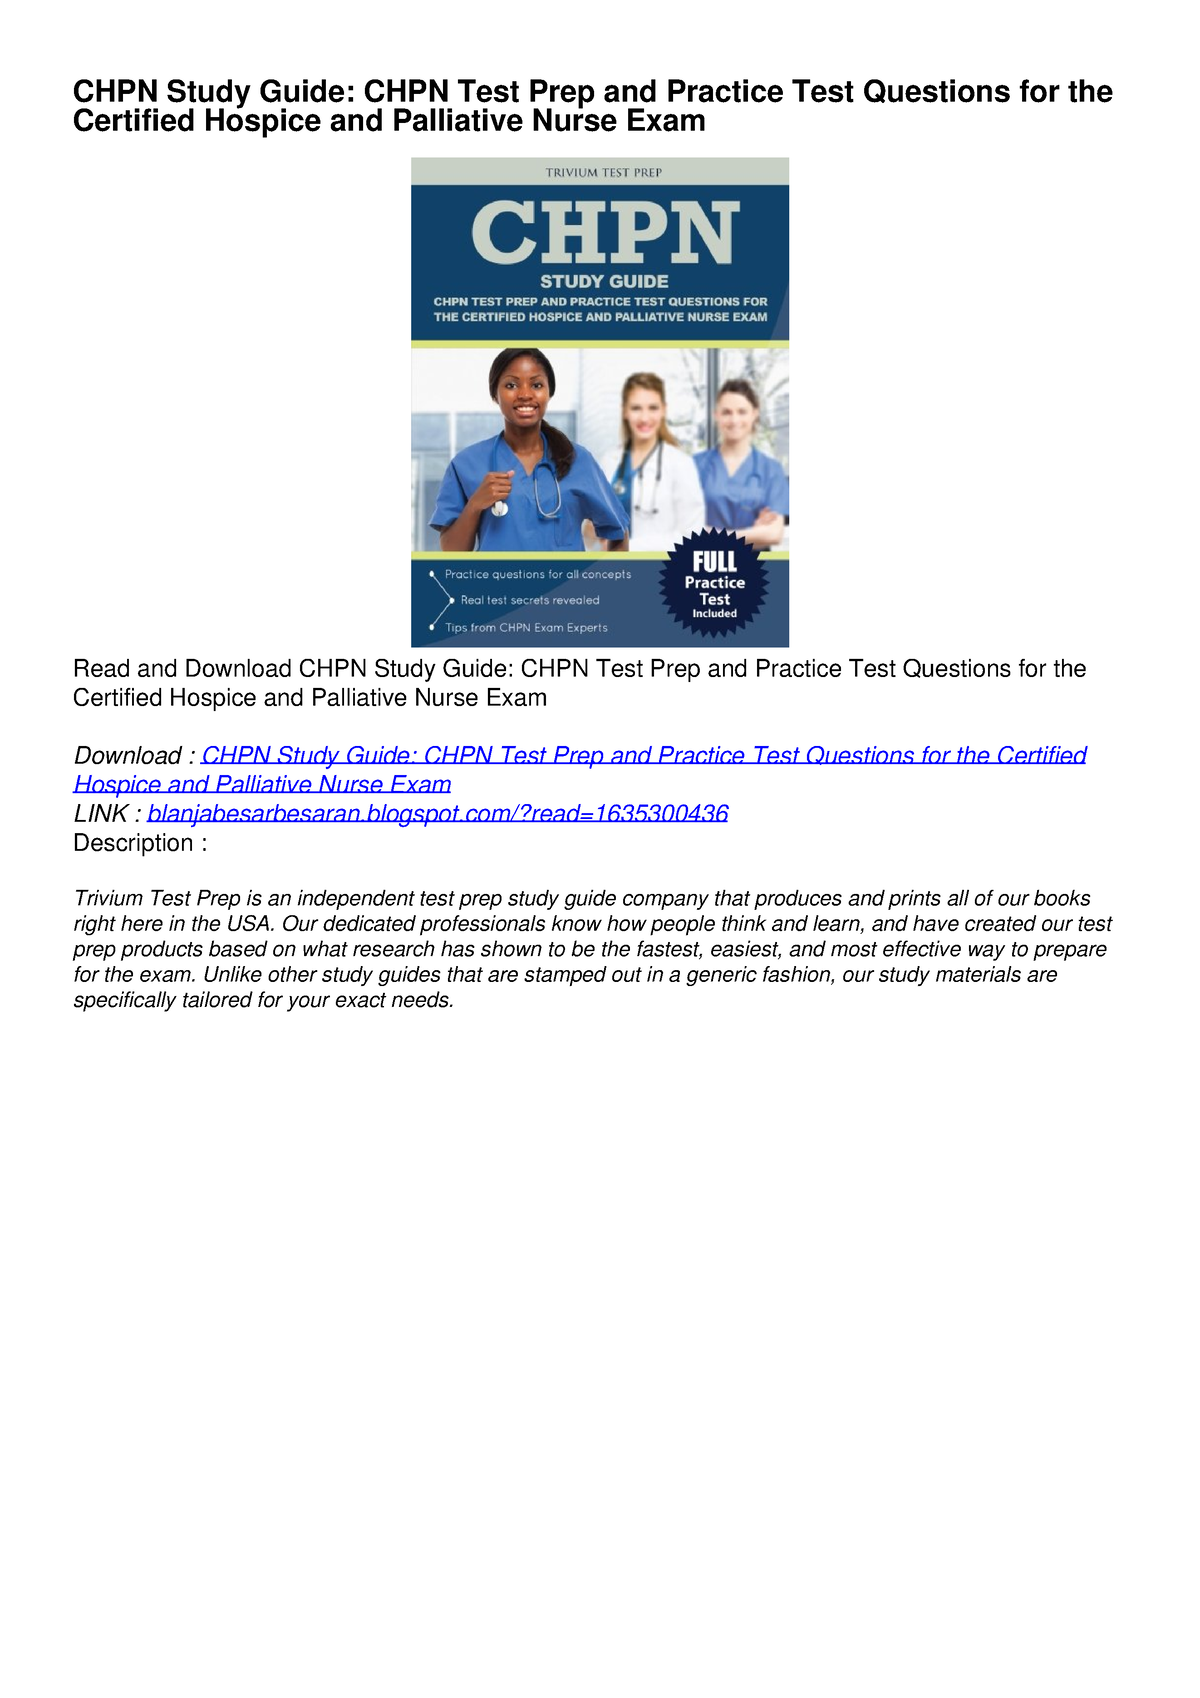 PDF BOOK DOWNLOADCHPN Study Guide CHPN Test Prep and Practice Test